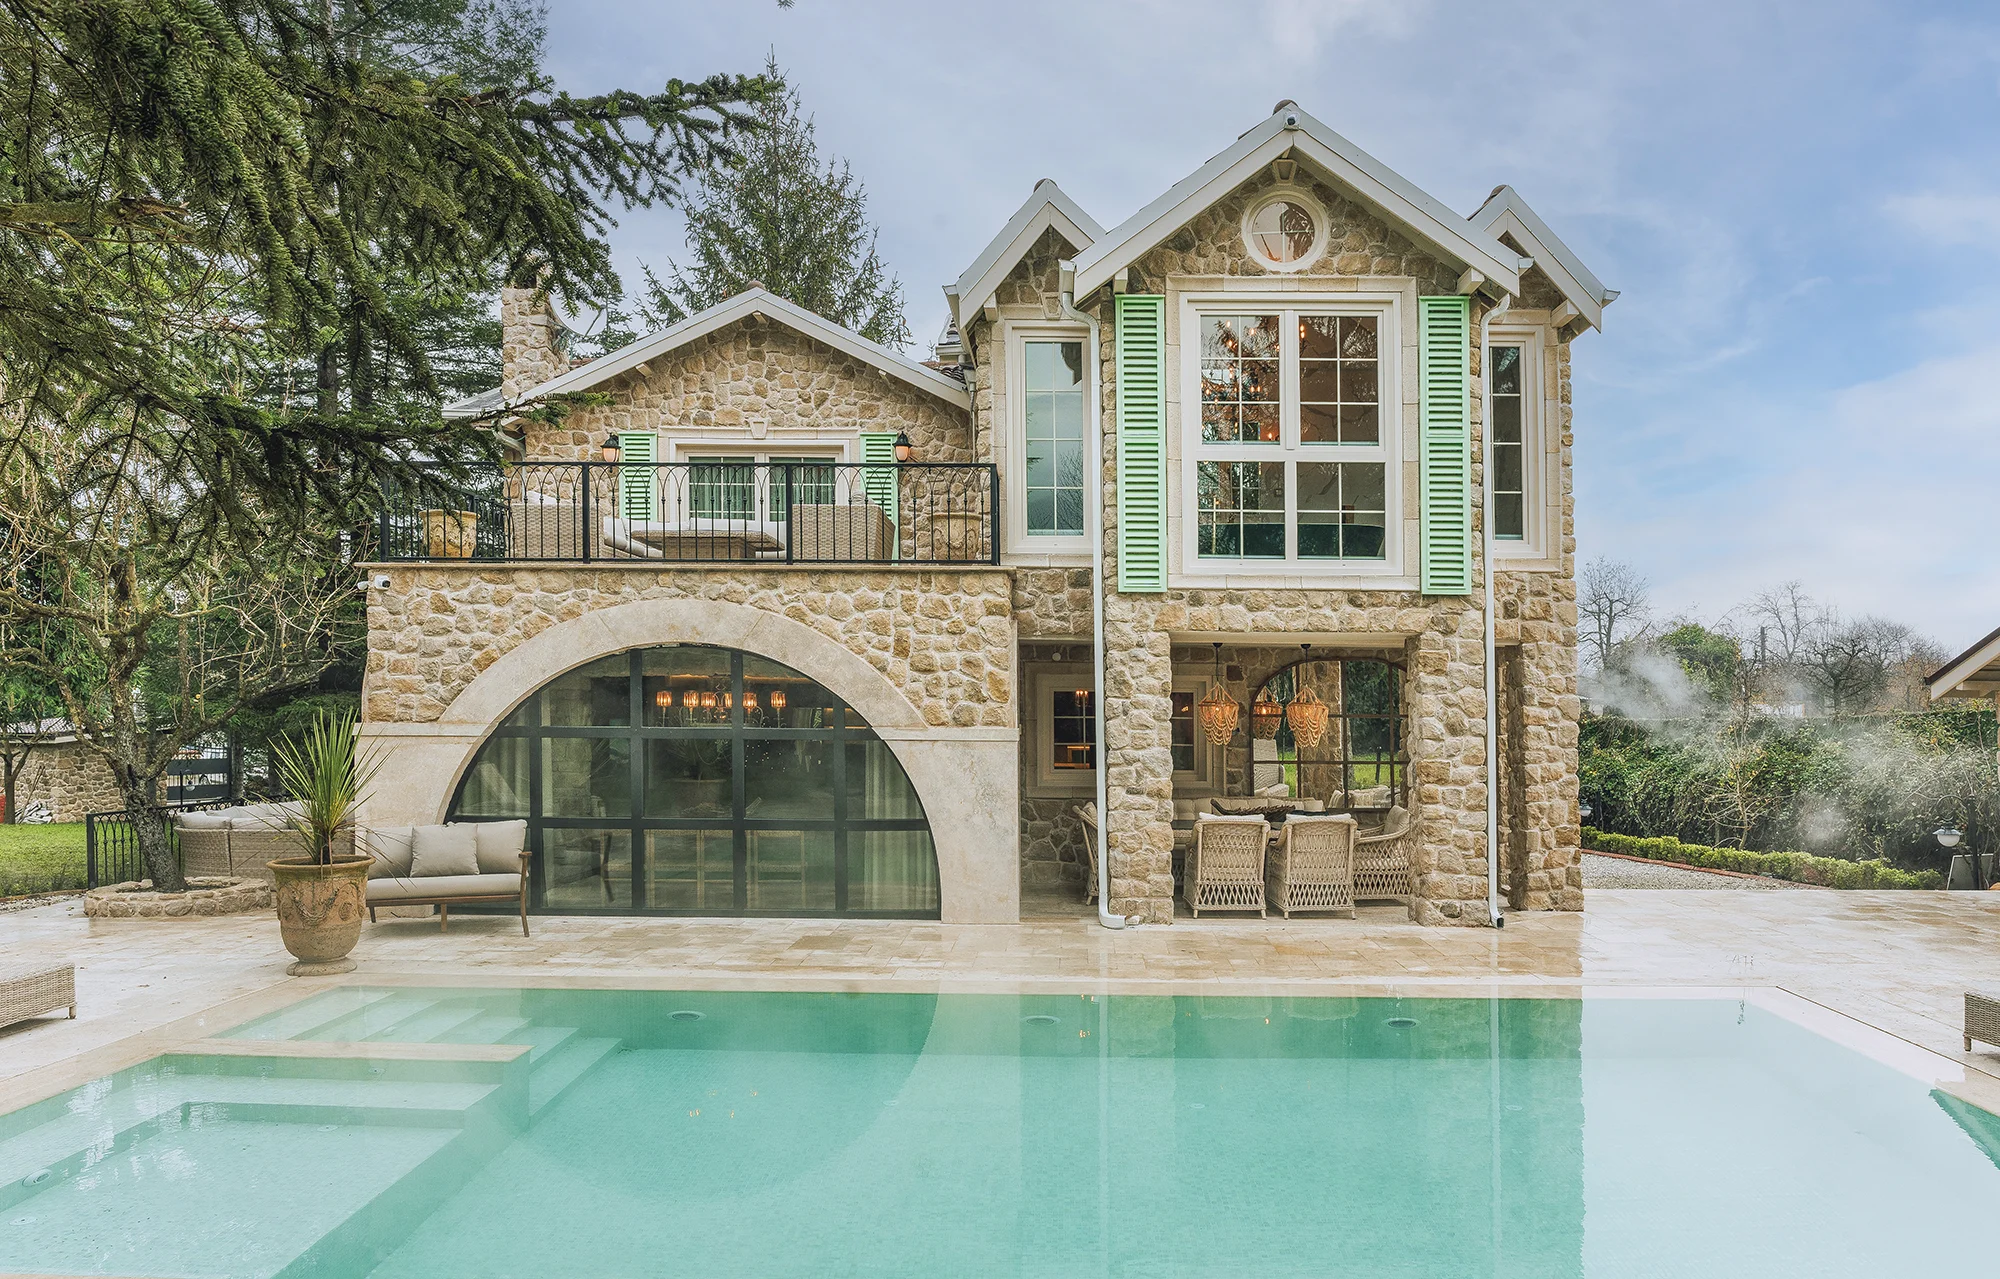 A spectacular stone house and swimming pool